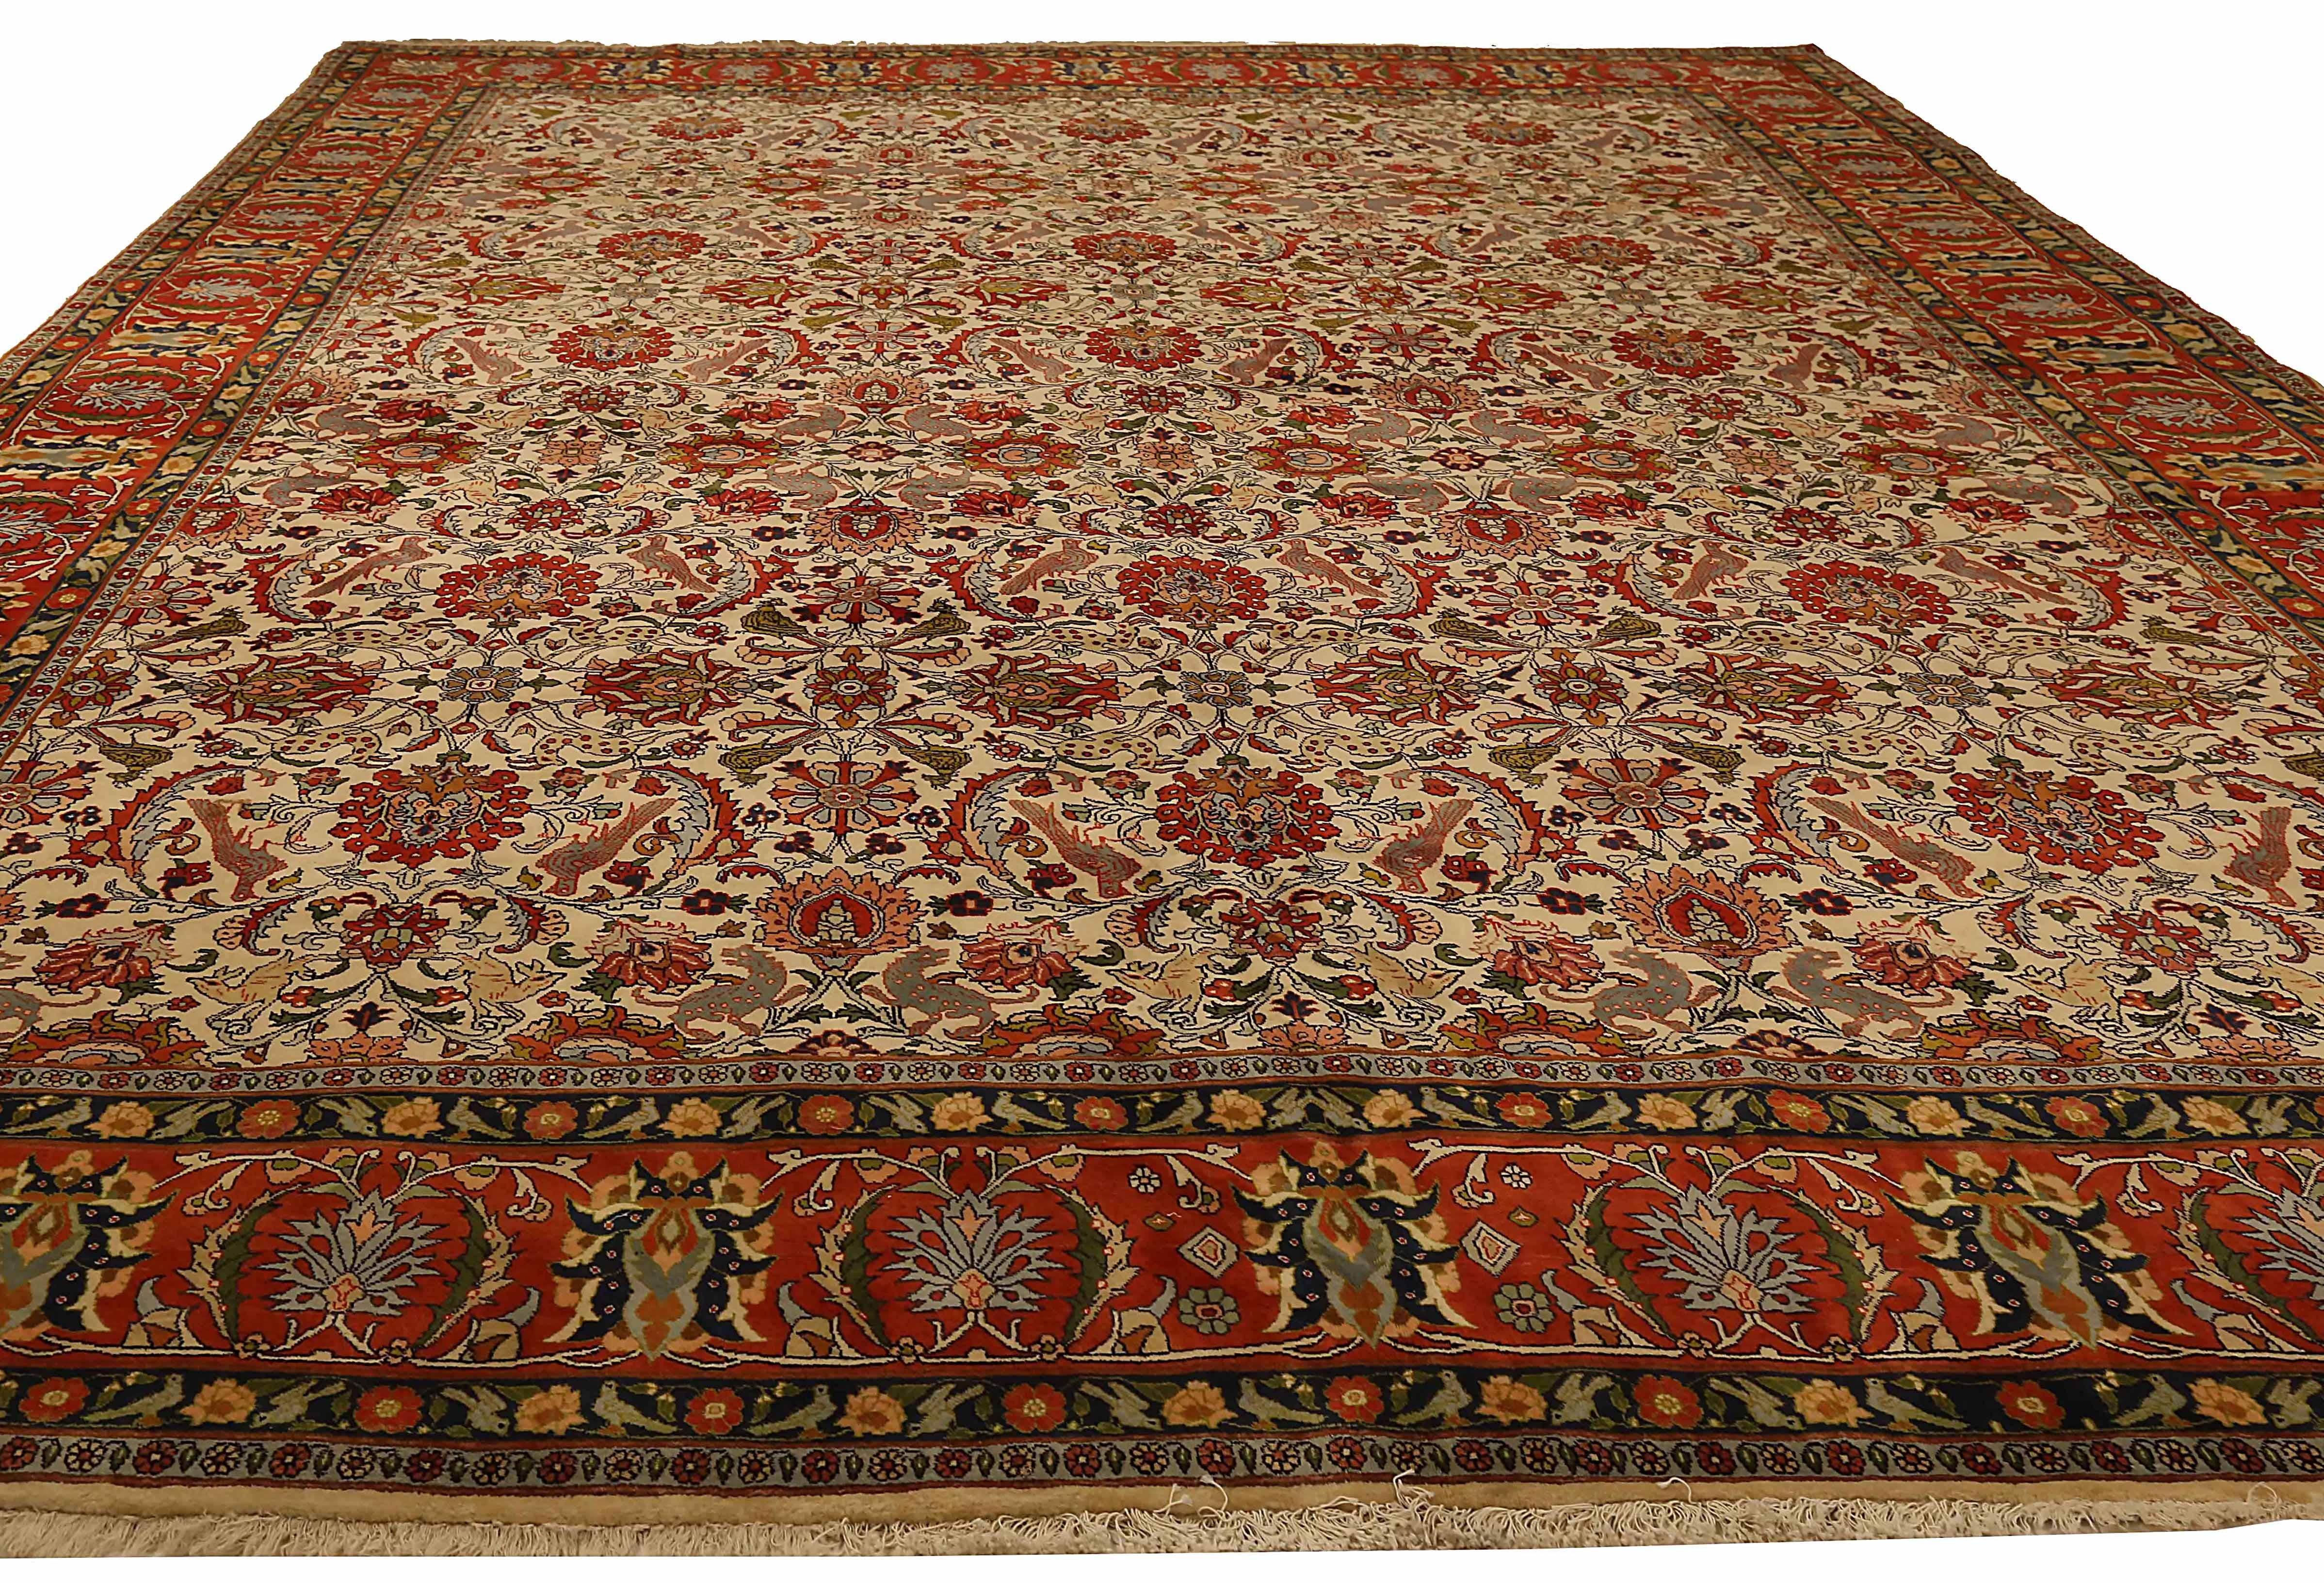 Antique Persian area rug handwoven from the finest sheep’s wool. It’s colored with all-natural vegetable dyes that are safe for humans and pets. It’s a traditional Varamin design handwoven by expert artisans. It’s a lovely area rug that can be